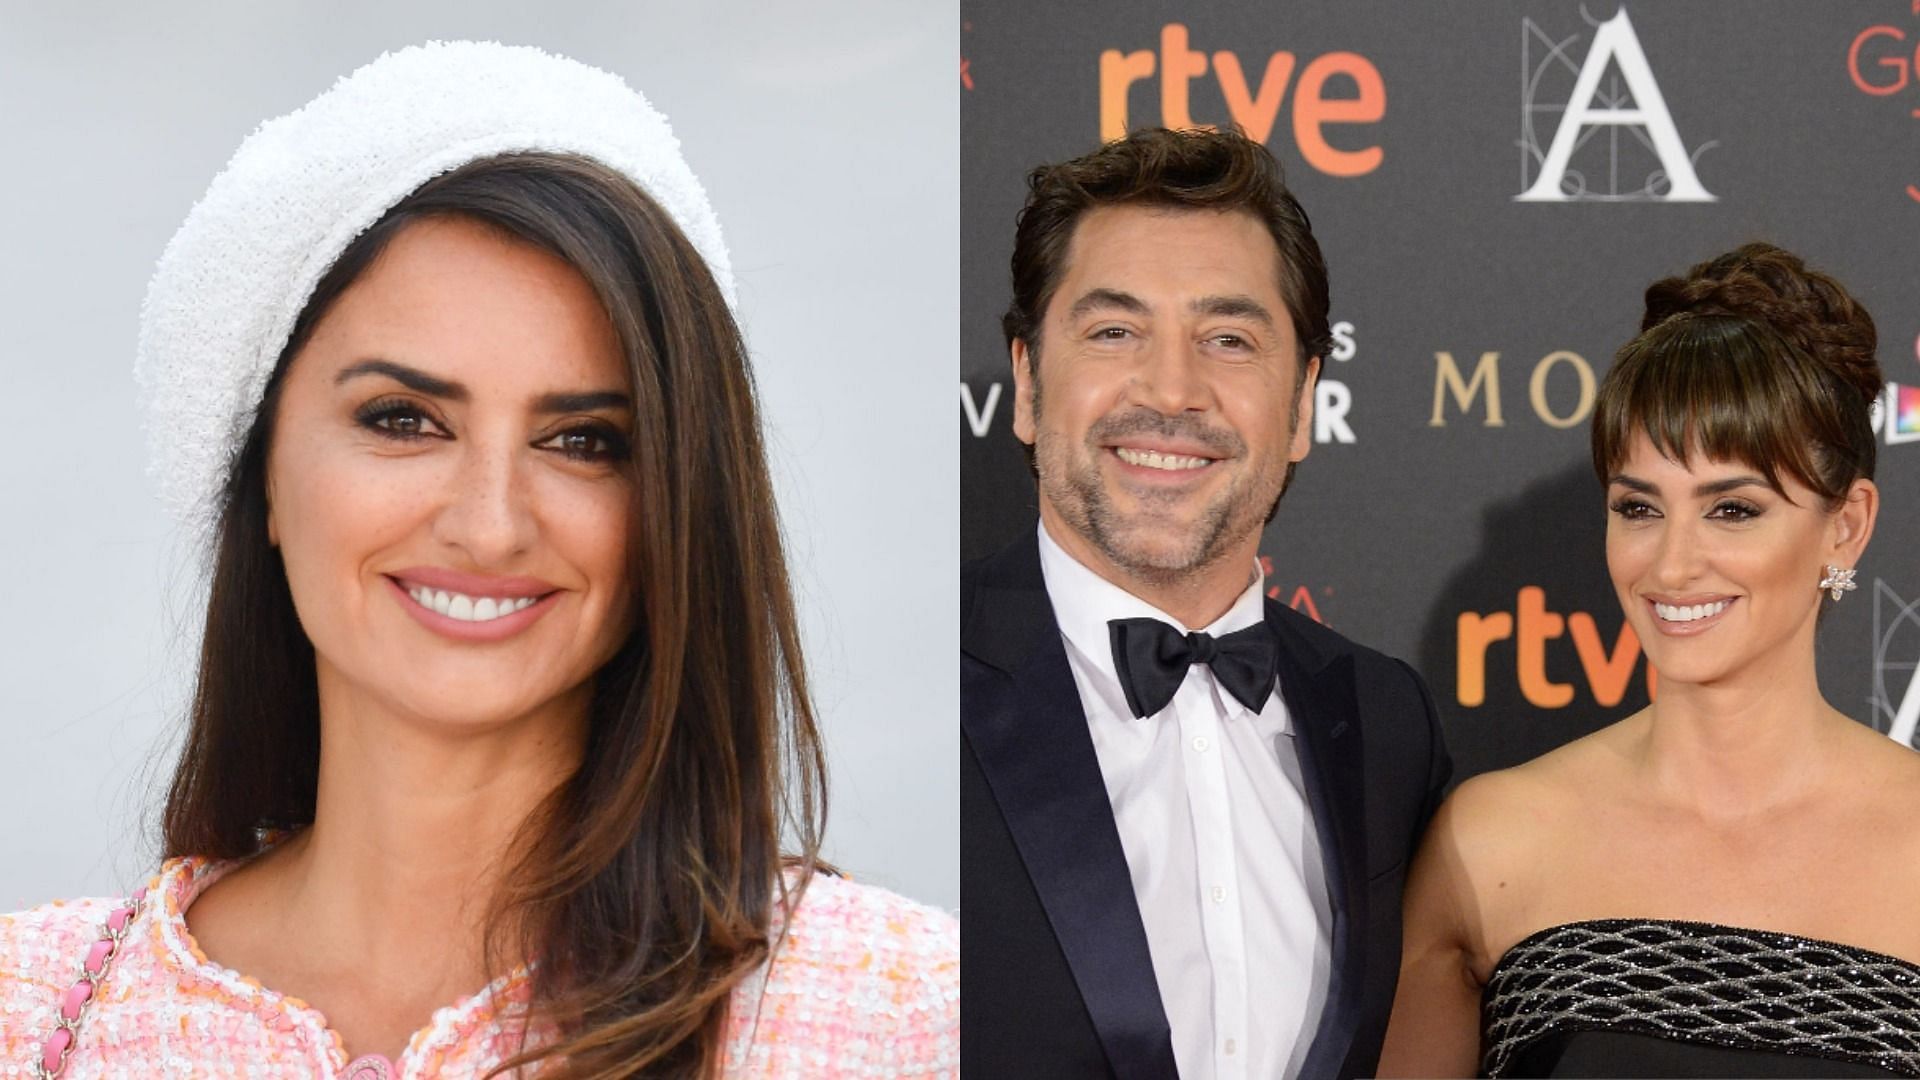 Penelope Cruz shares two children with Javier Bardem (Image via Corbis/Getty Images and Fotonoticias/WireImage)